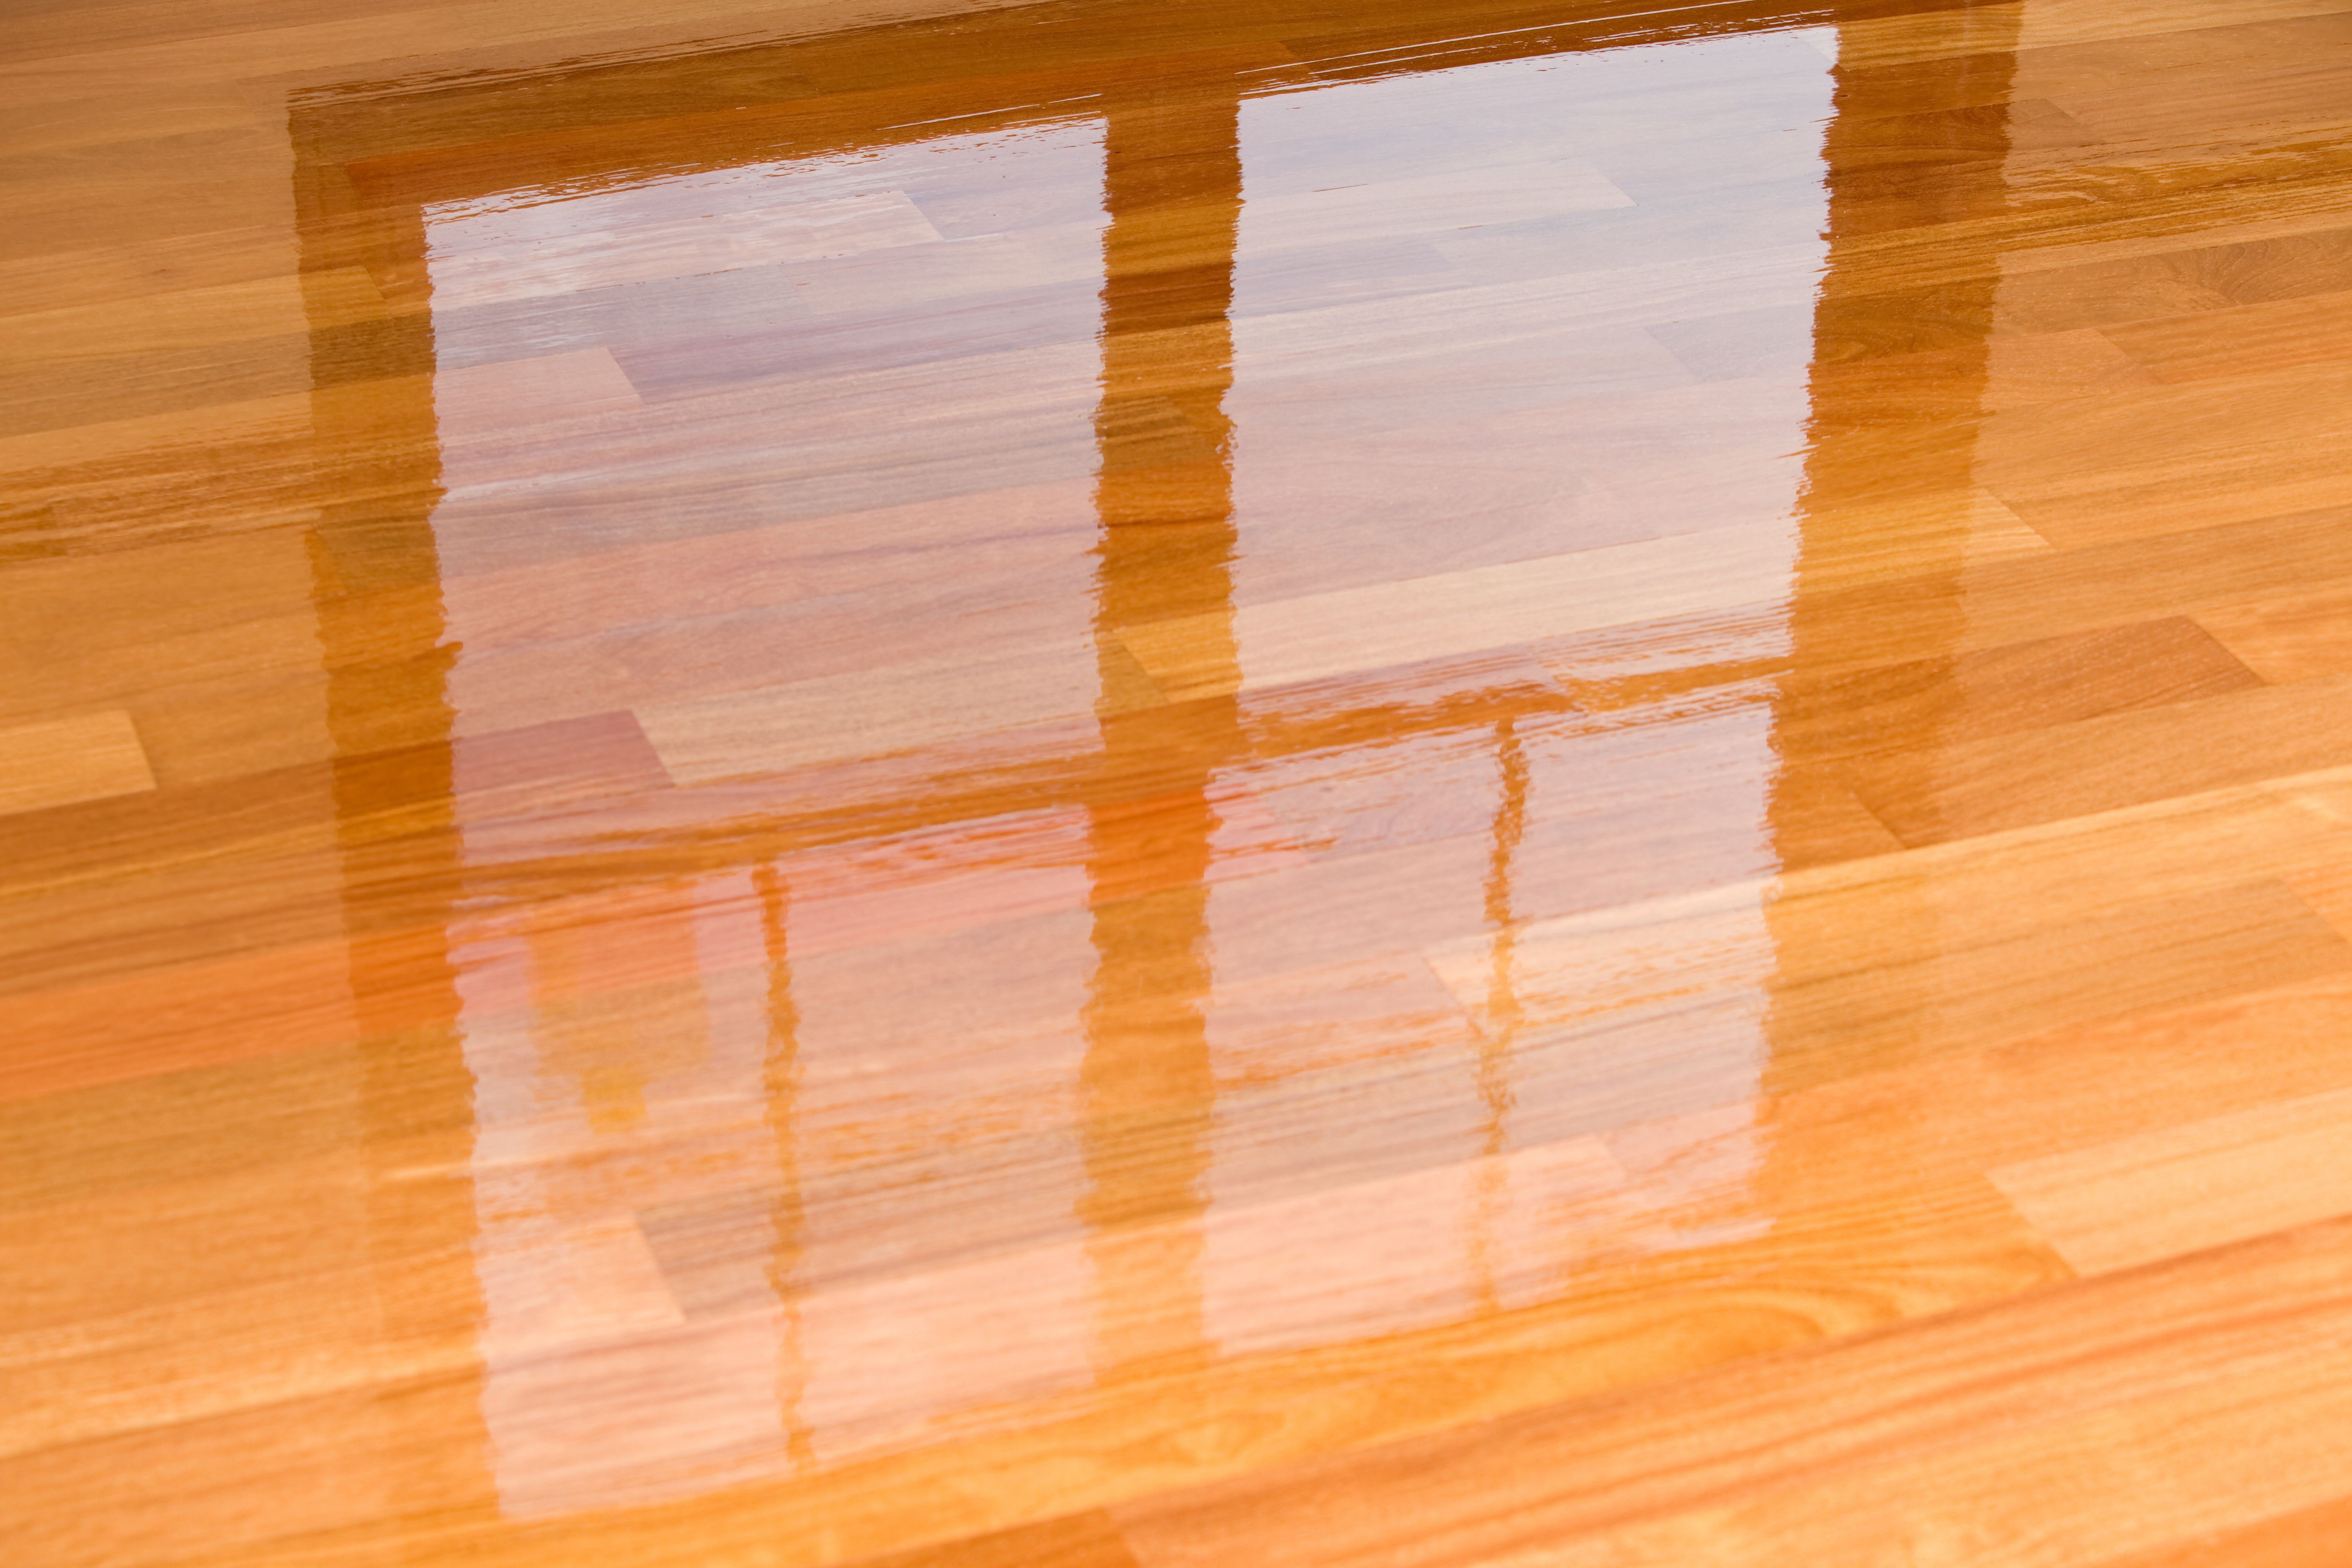 21 Awesome Filling Large Gaps In Hardwood Floors 2024 free download filling large gaps in hardwood floors of guide to laminate flooring water and damage repair within wet polyurethane on new hardwood floor with window reflection 183846705 582e34da3df78c6f6a4